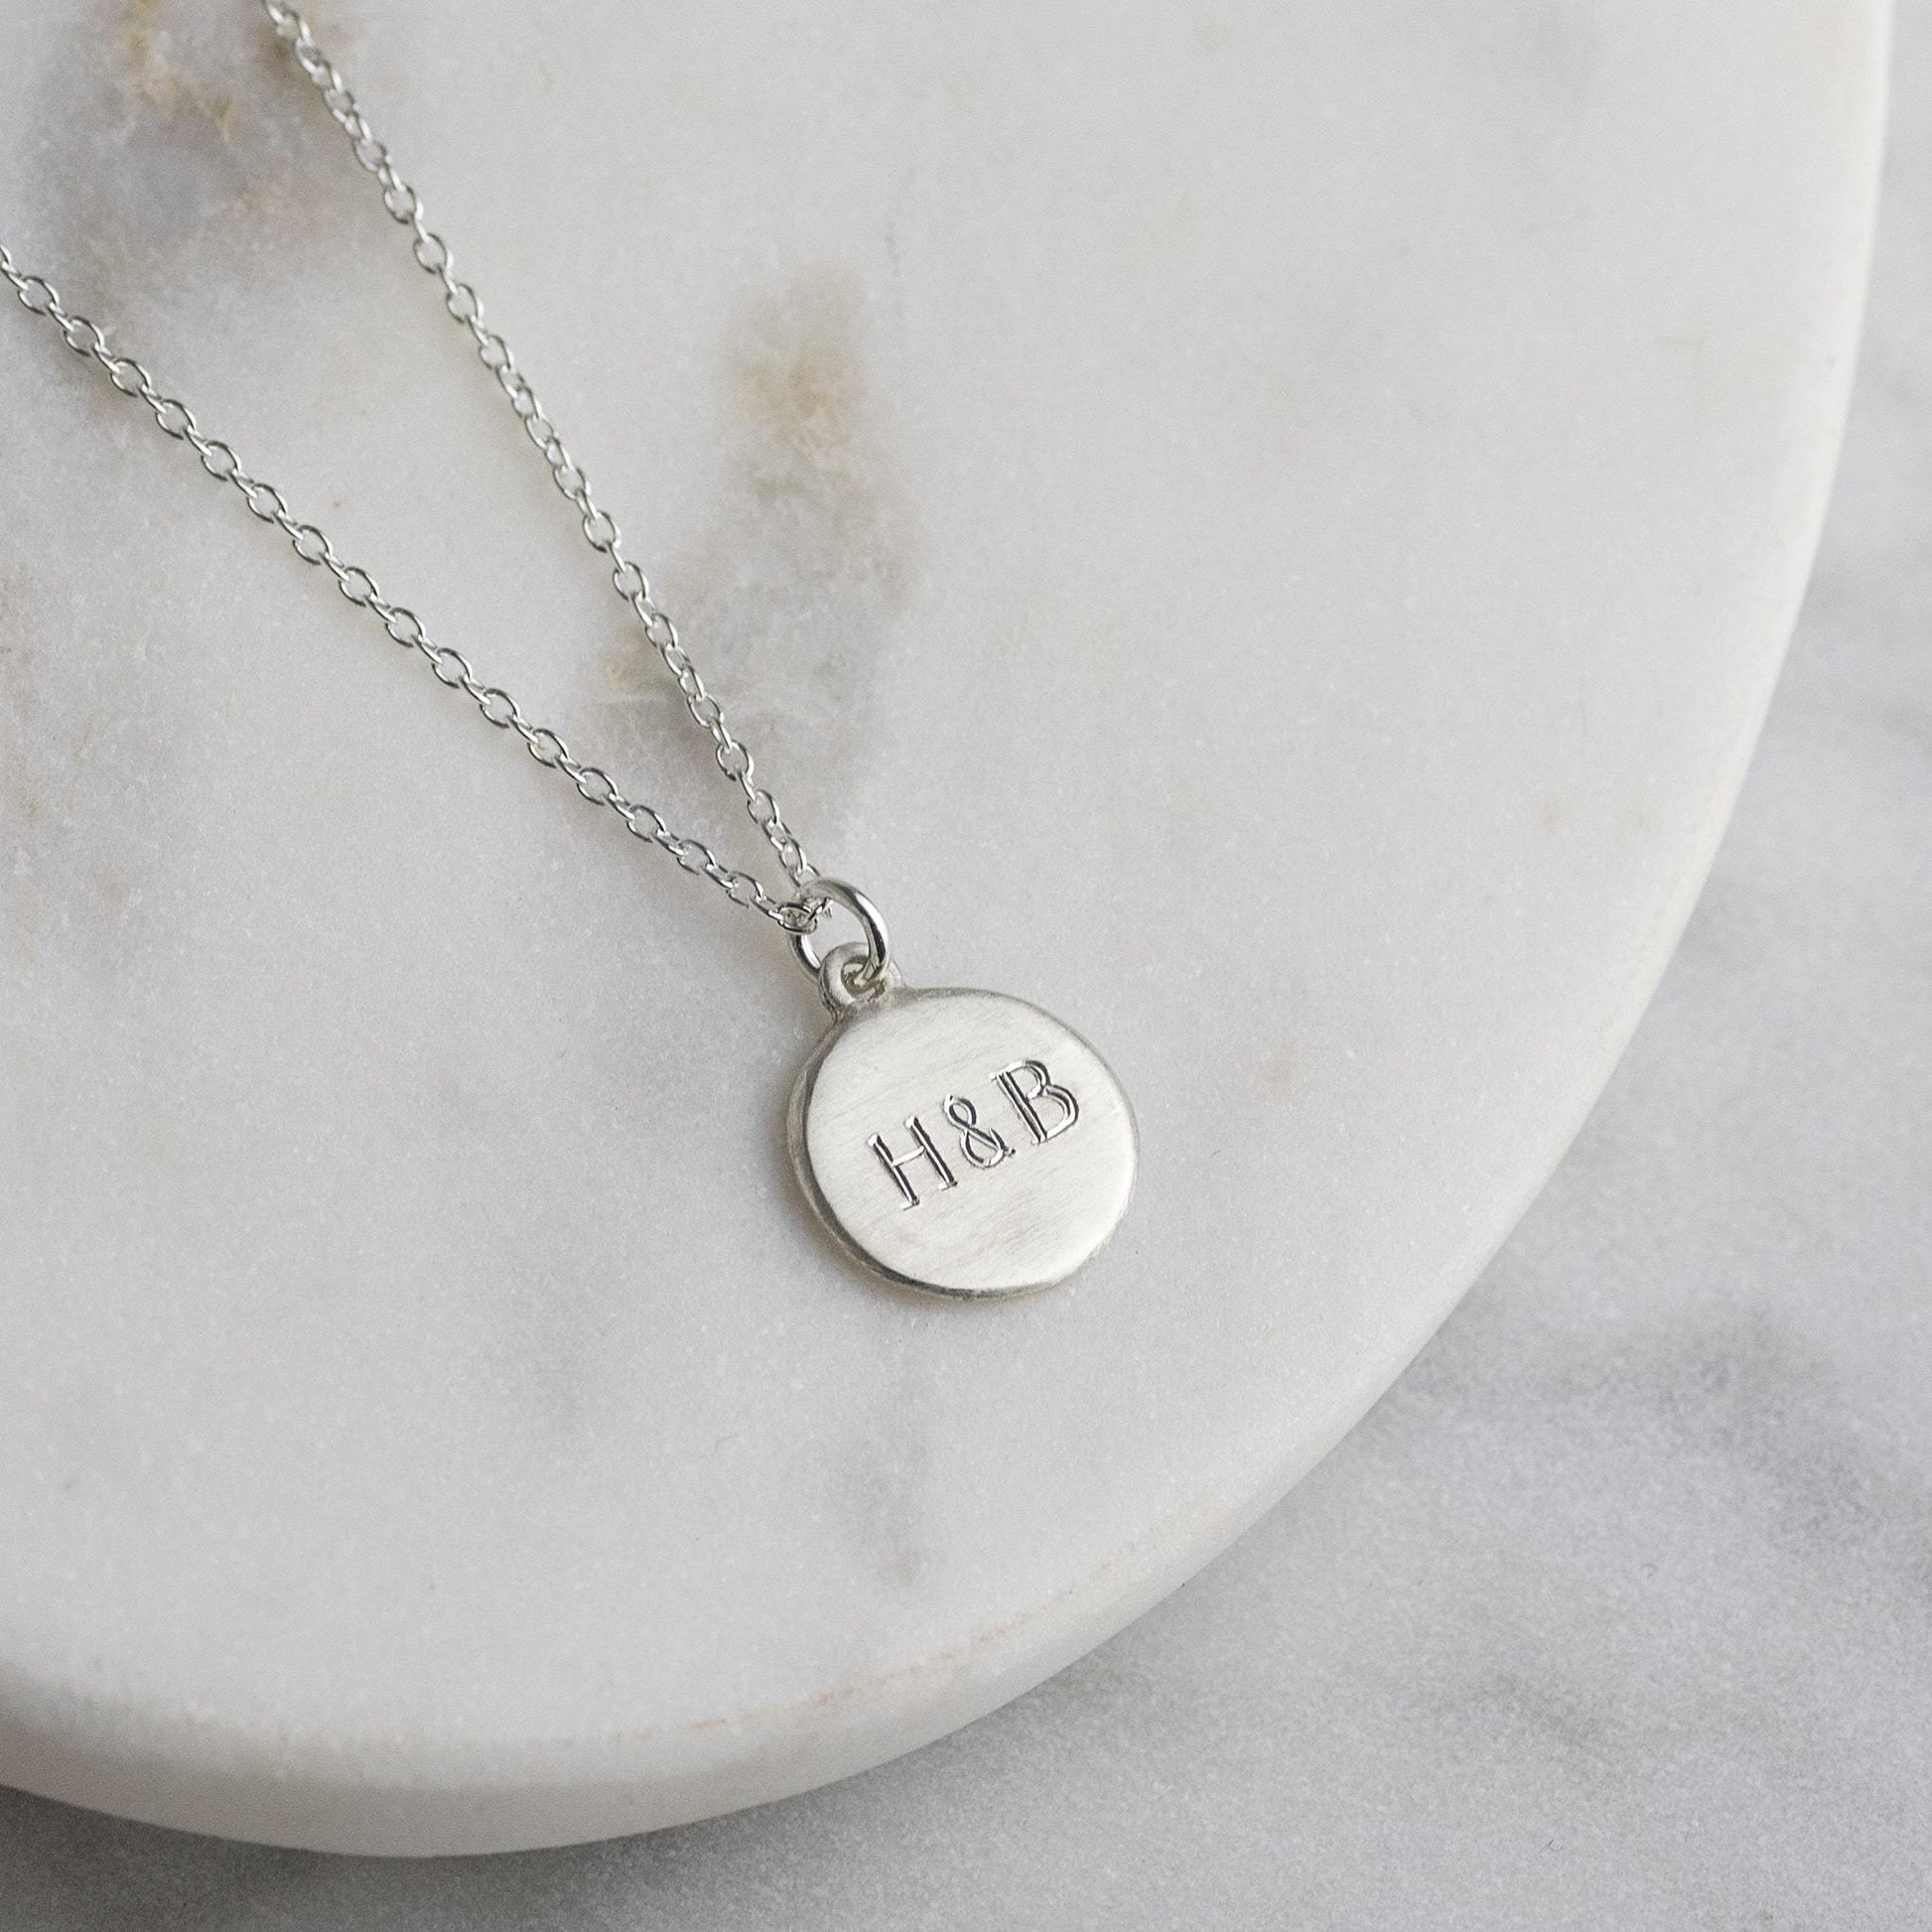 Personalised Engraved Silver Initials Necklace